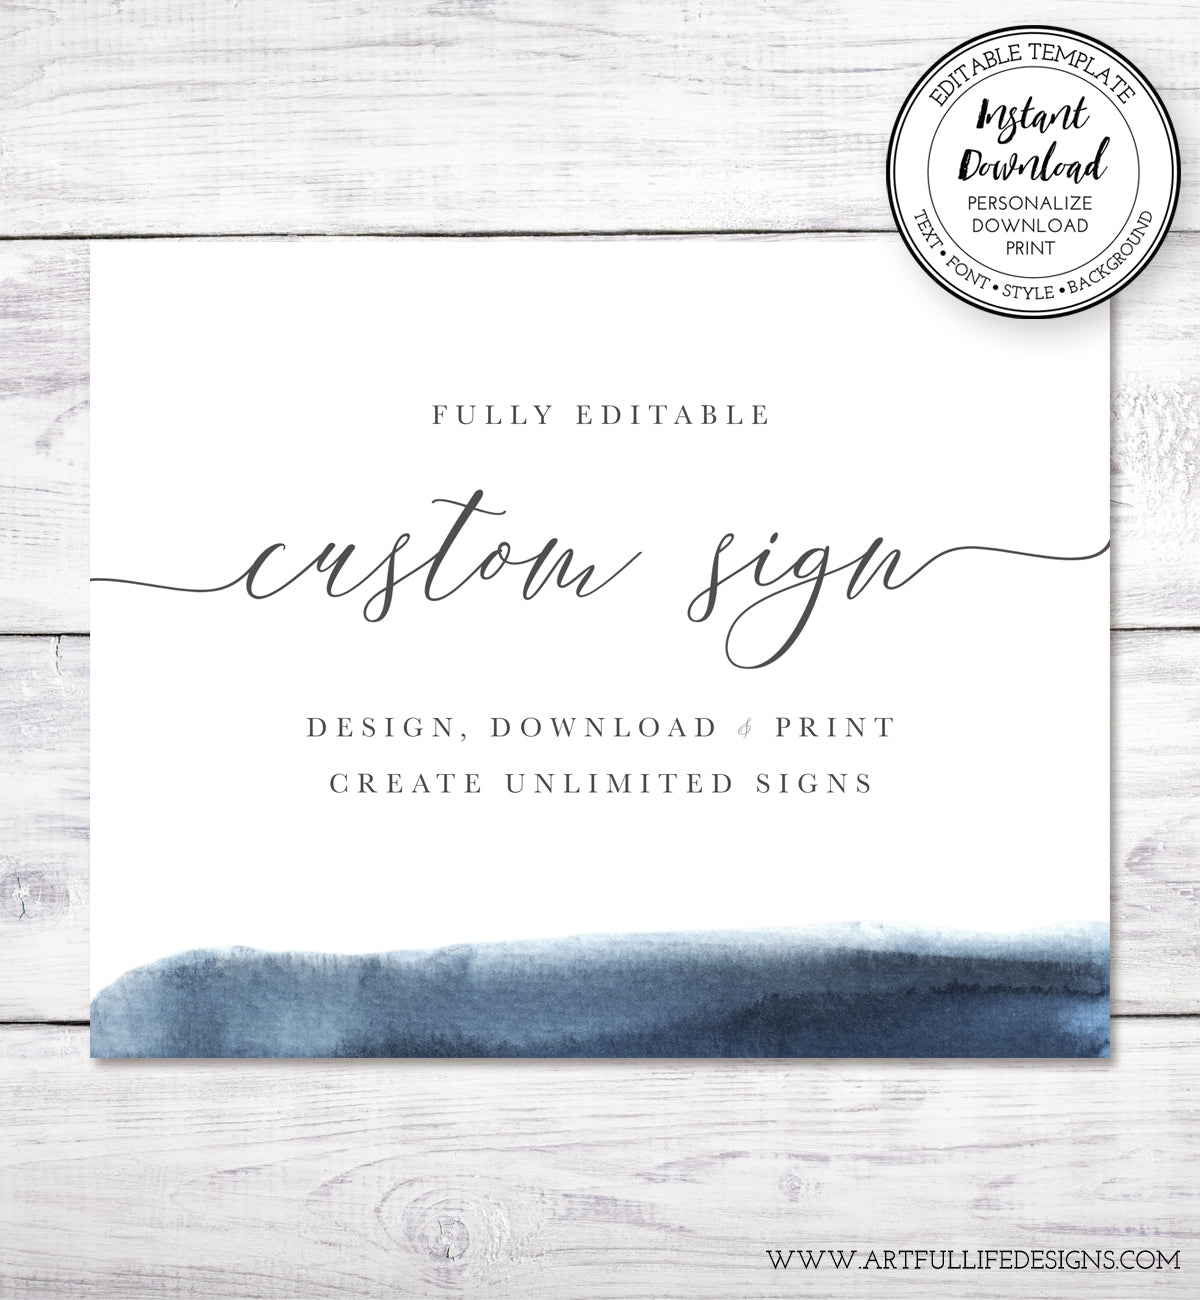 modern wedding custom sign with blue watercolor accent, 10 x 8 inches, landscape orientation